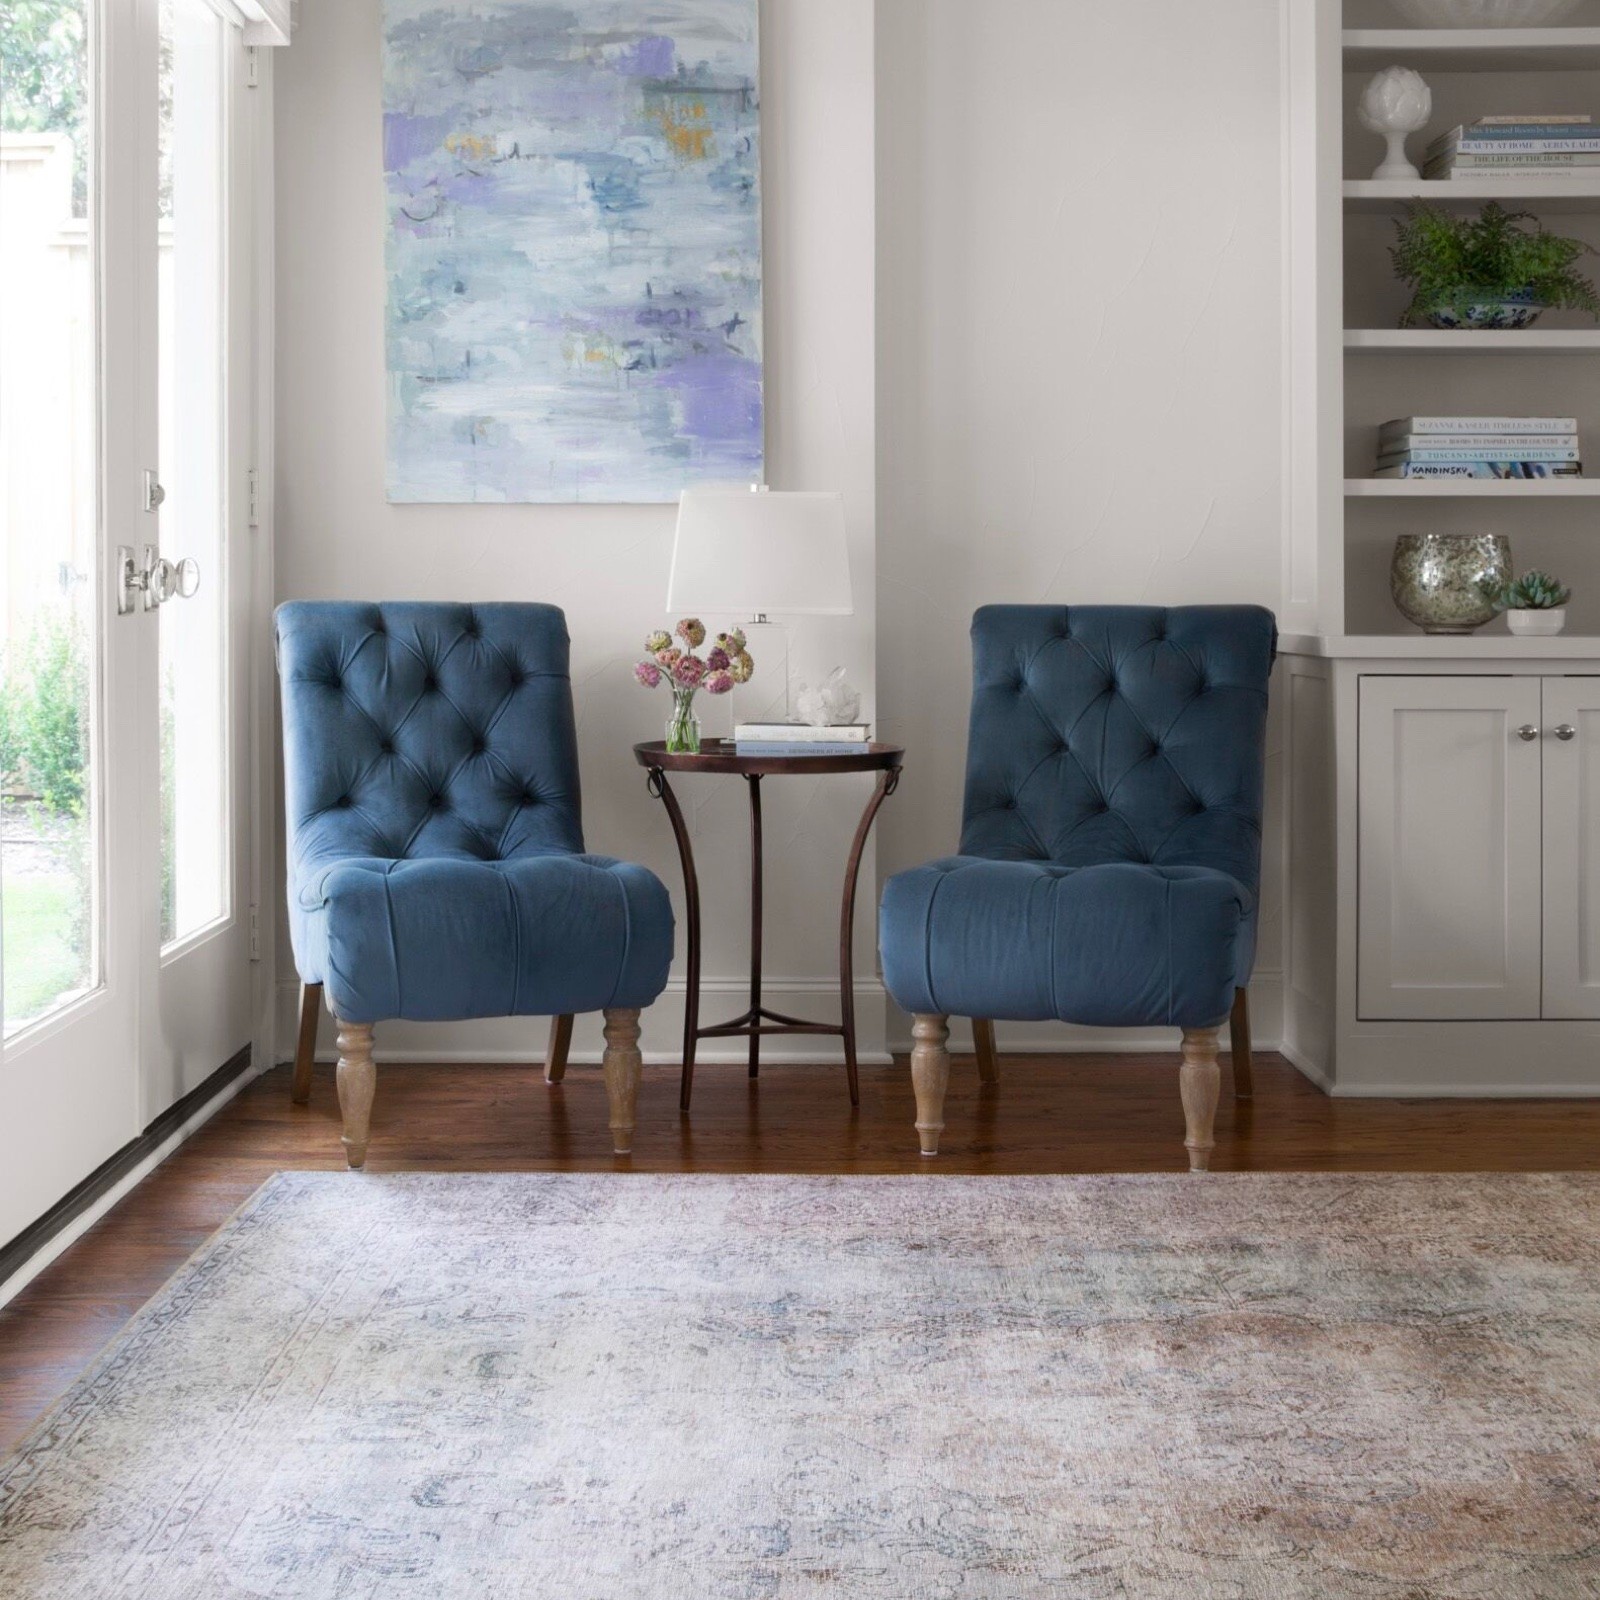 Blue Chairs on Rug | The Floor Store VA